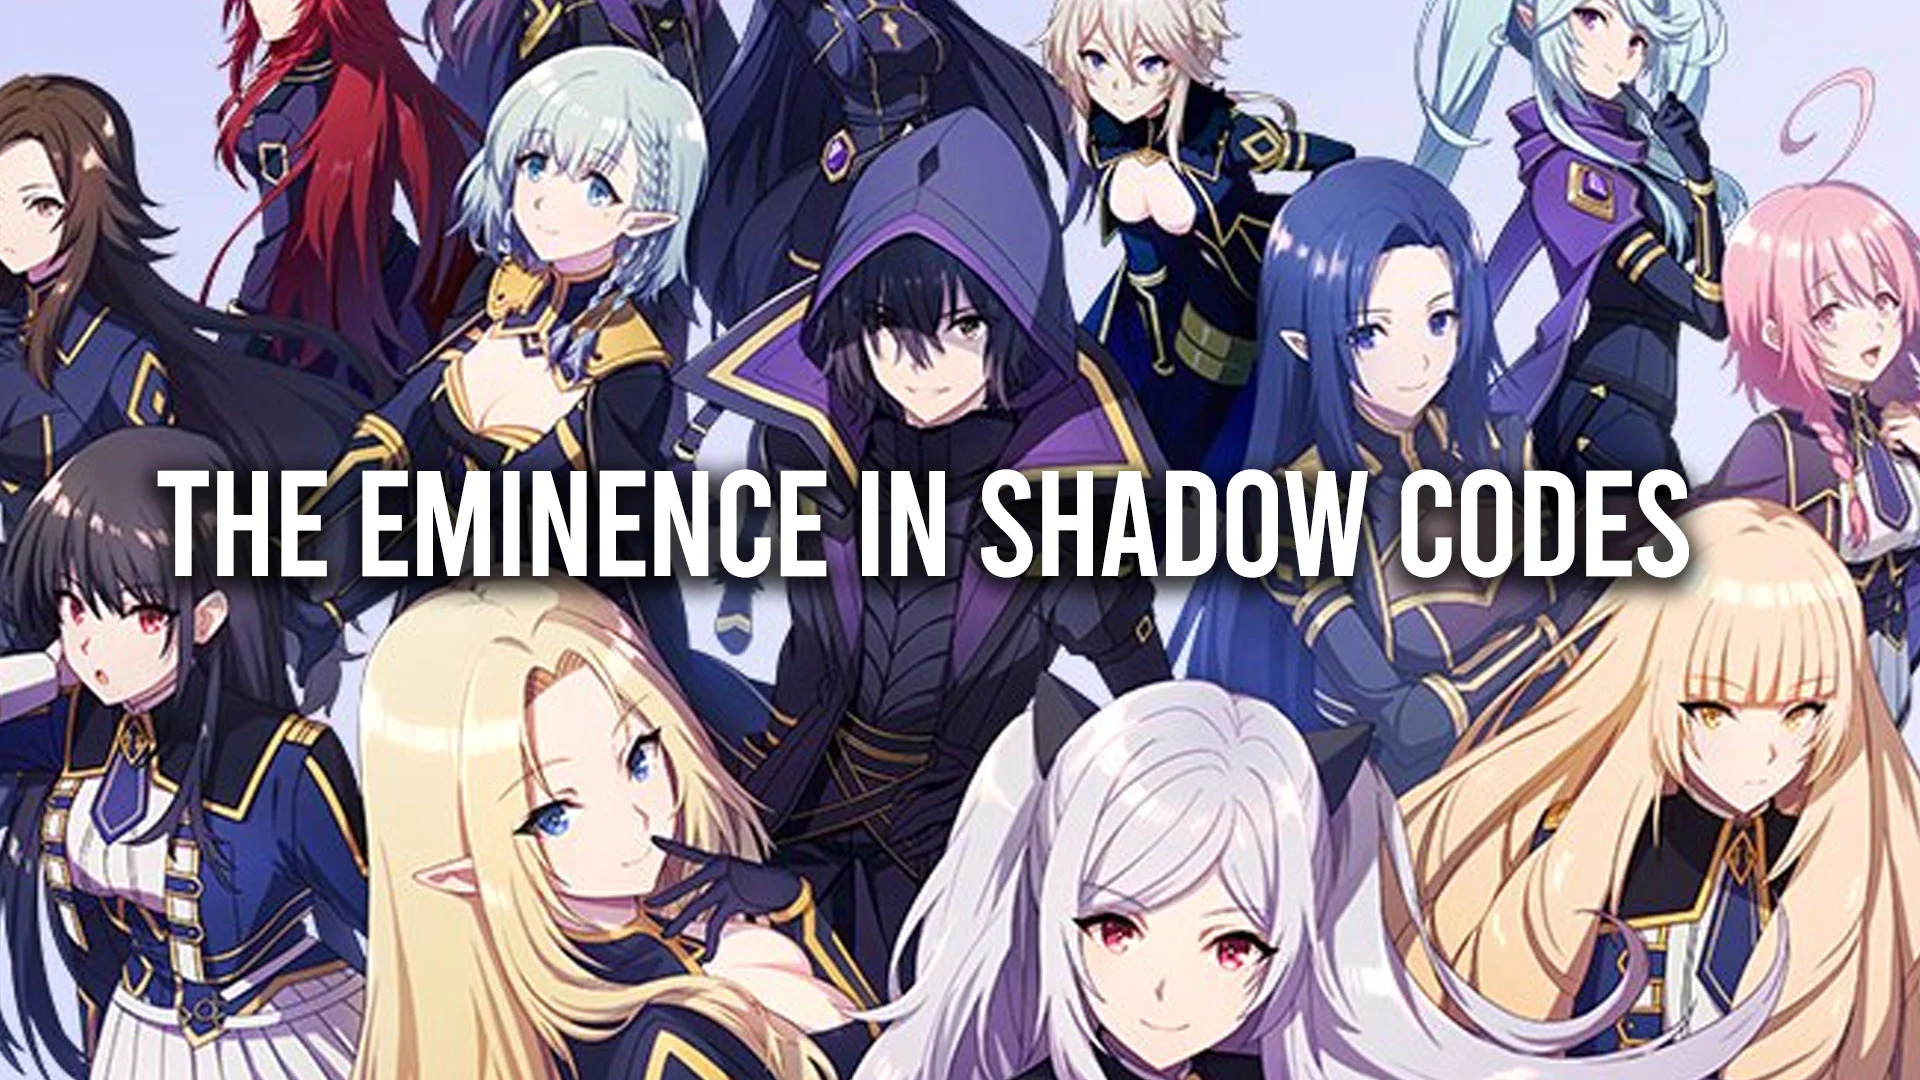 The Eminence in Shadow RPG Codes